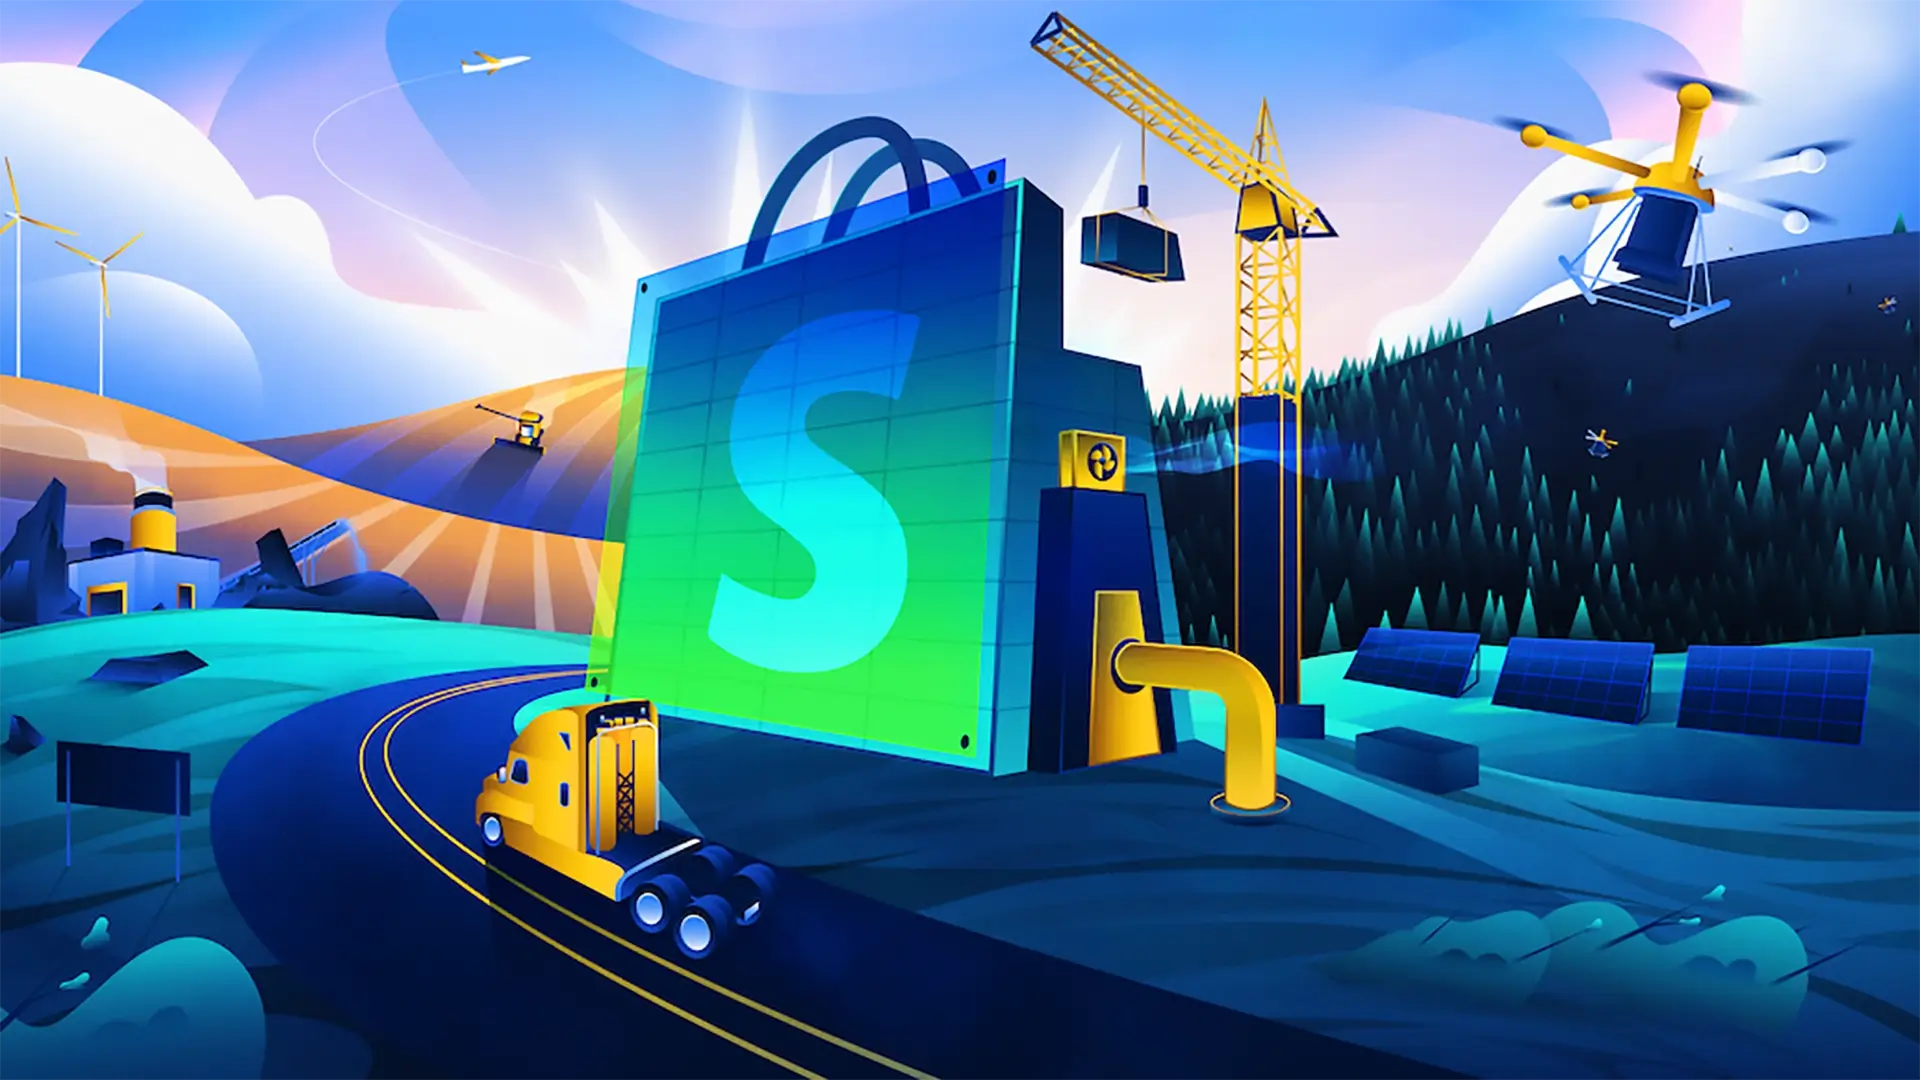 Shopify sustainability carbon credit purchases illustration by cody muir